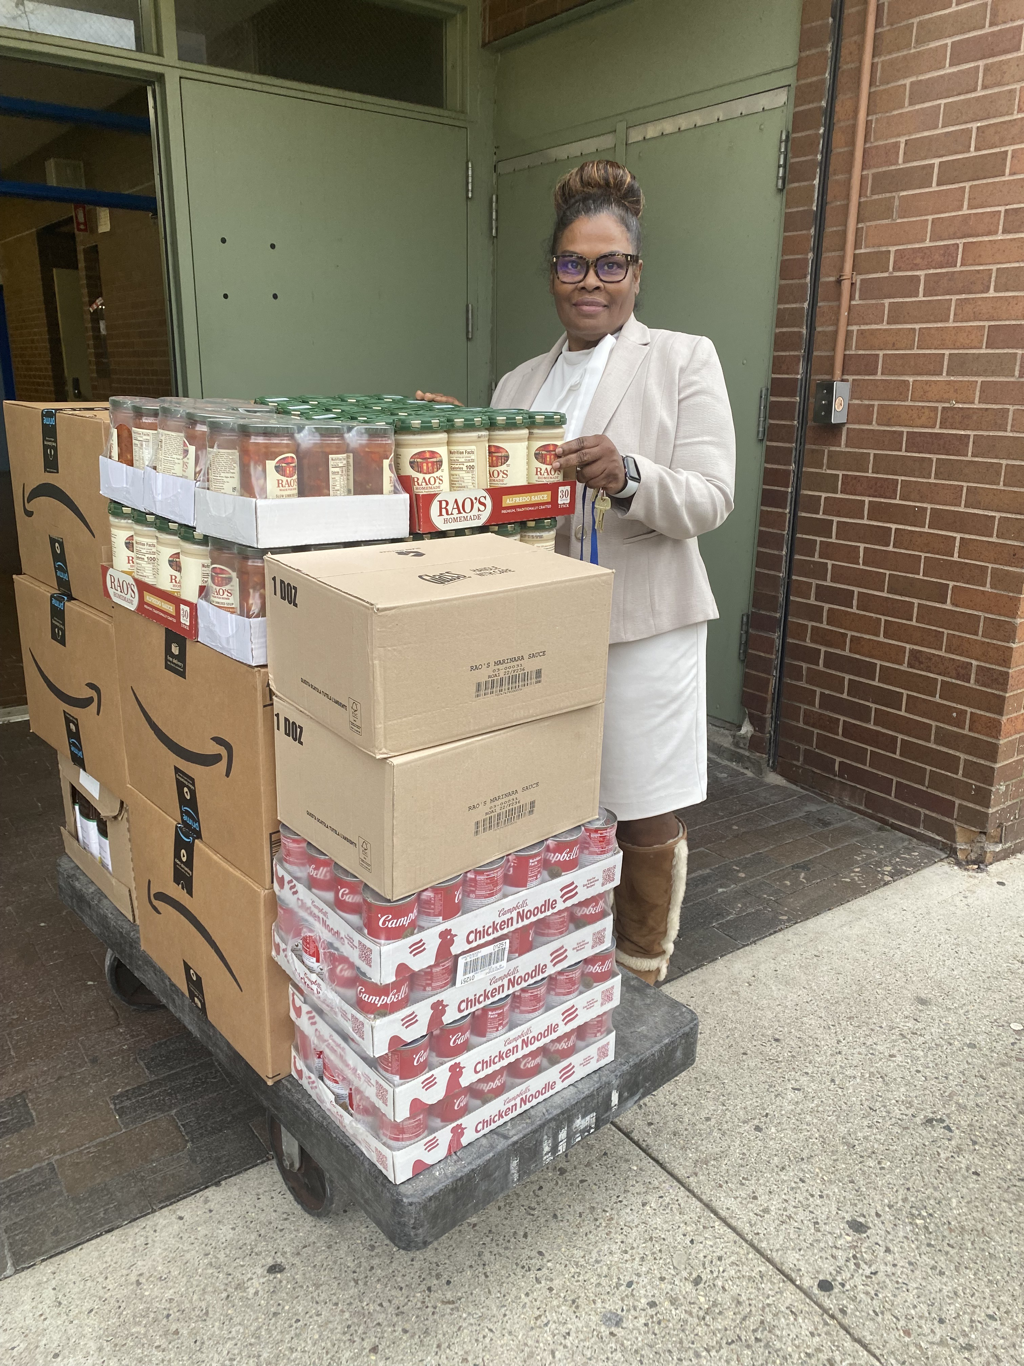 Picture of our Principal, Dr. King, taking delivery of boxes of food items for our new community pantry!